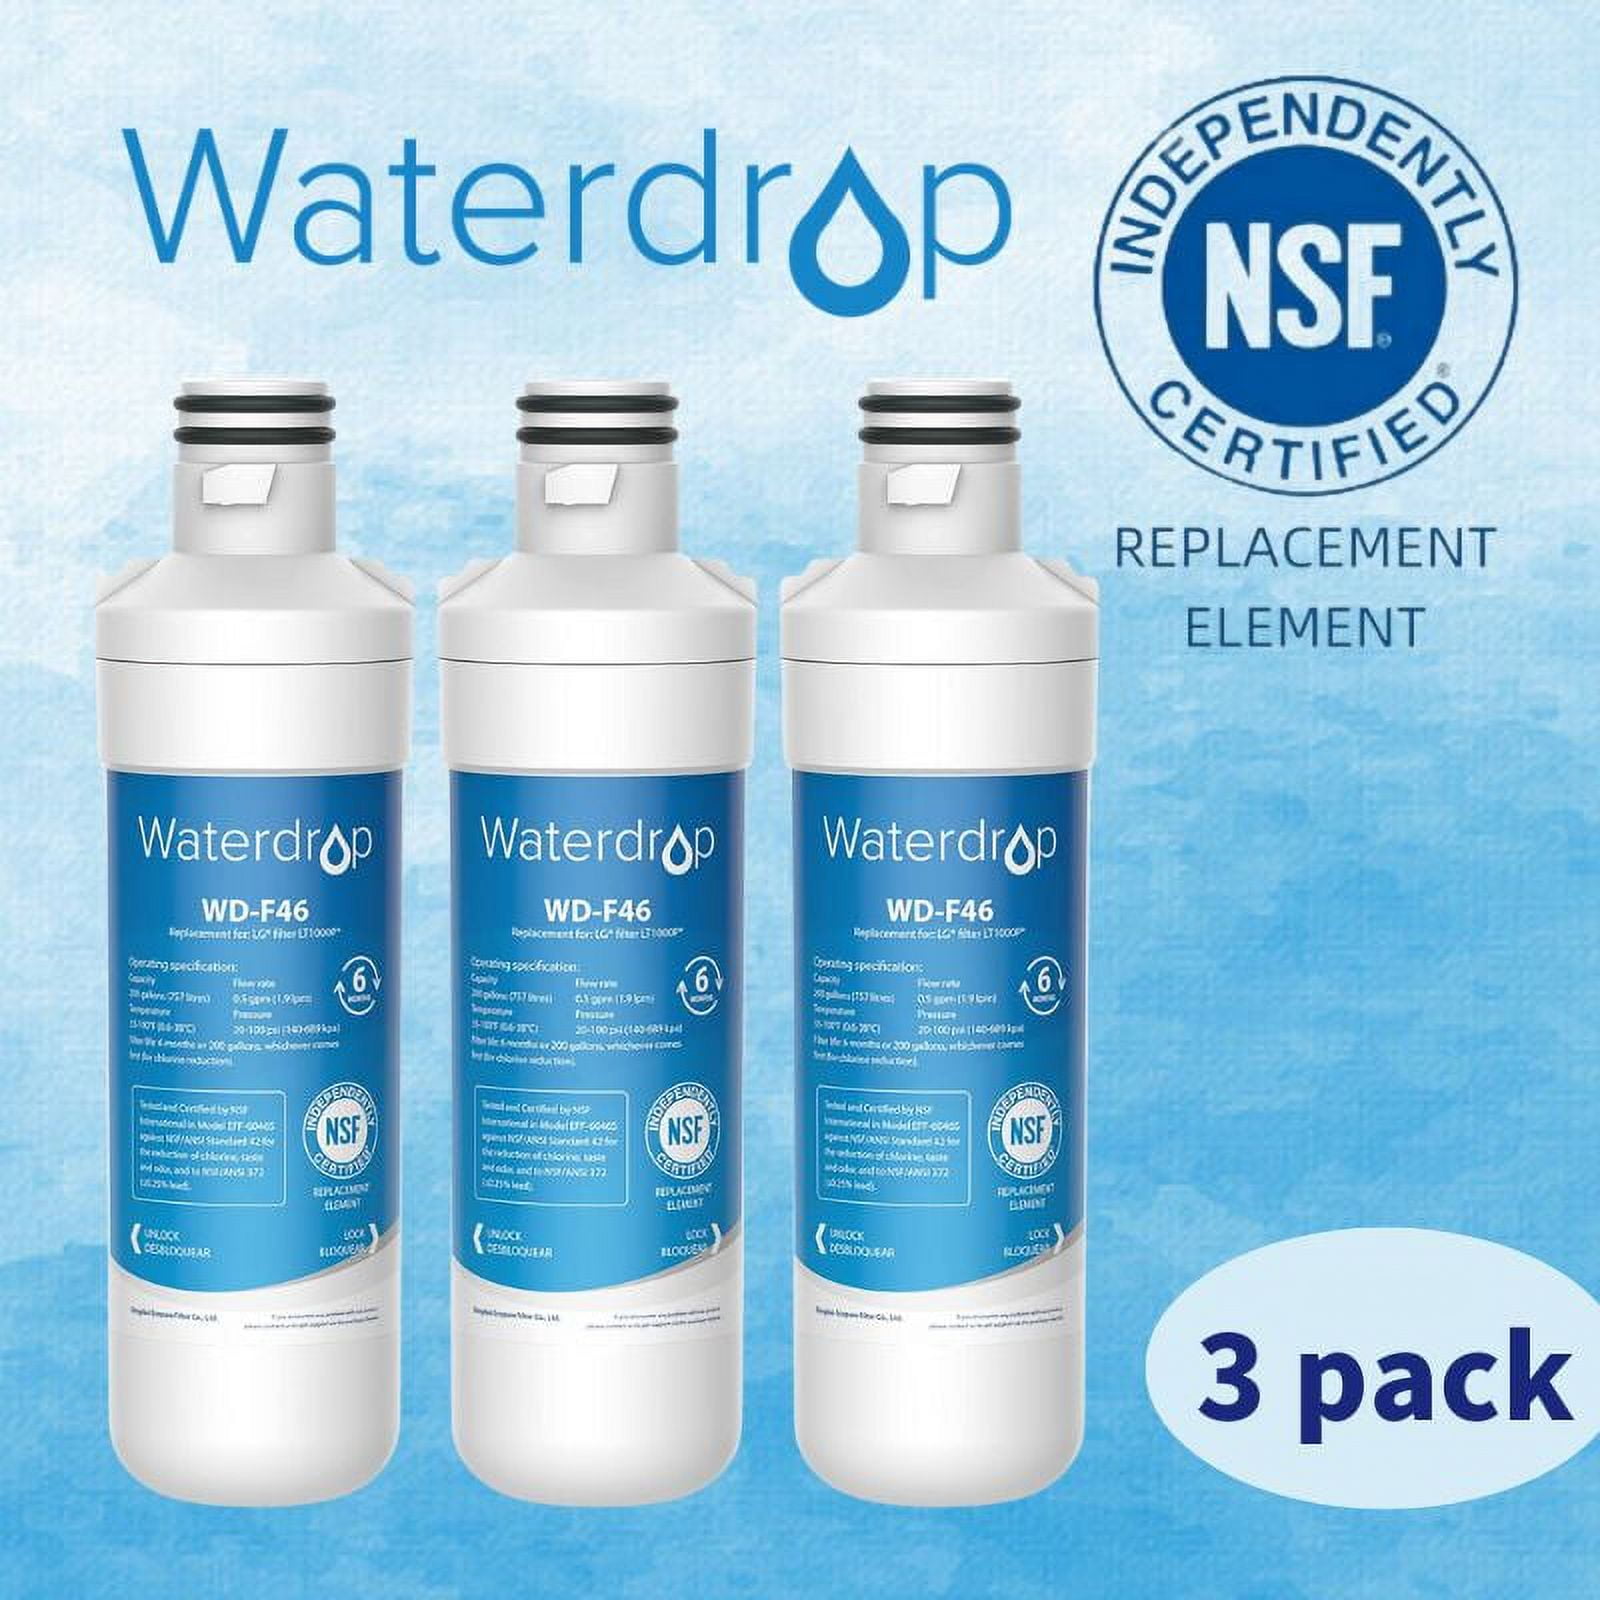 Waterdrop LT1000PC ADQ747935 MDJ64844601 Refrigerator Water Filter, Replacement for LG® LT1000P®, ADQ74793501, ADQ74793502, Kenmore 46-9980, 9980, LFXC24796S, LSFXC2496D, NSF Certified, Pack of 3